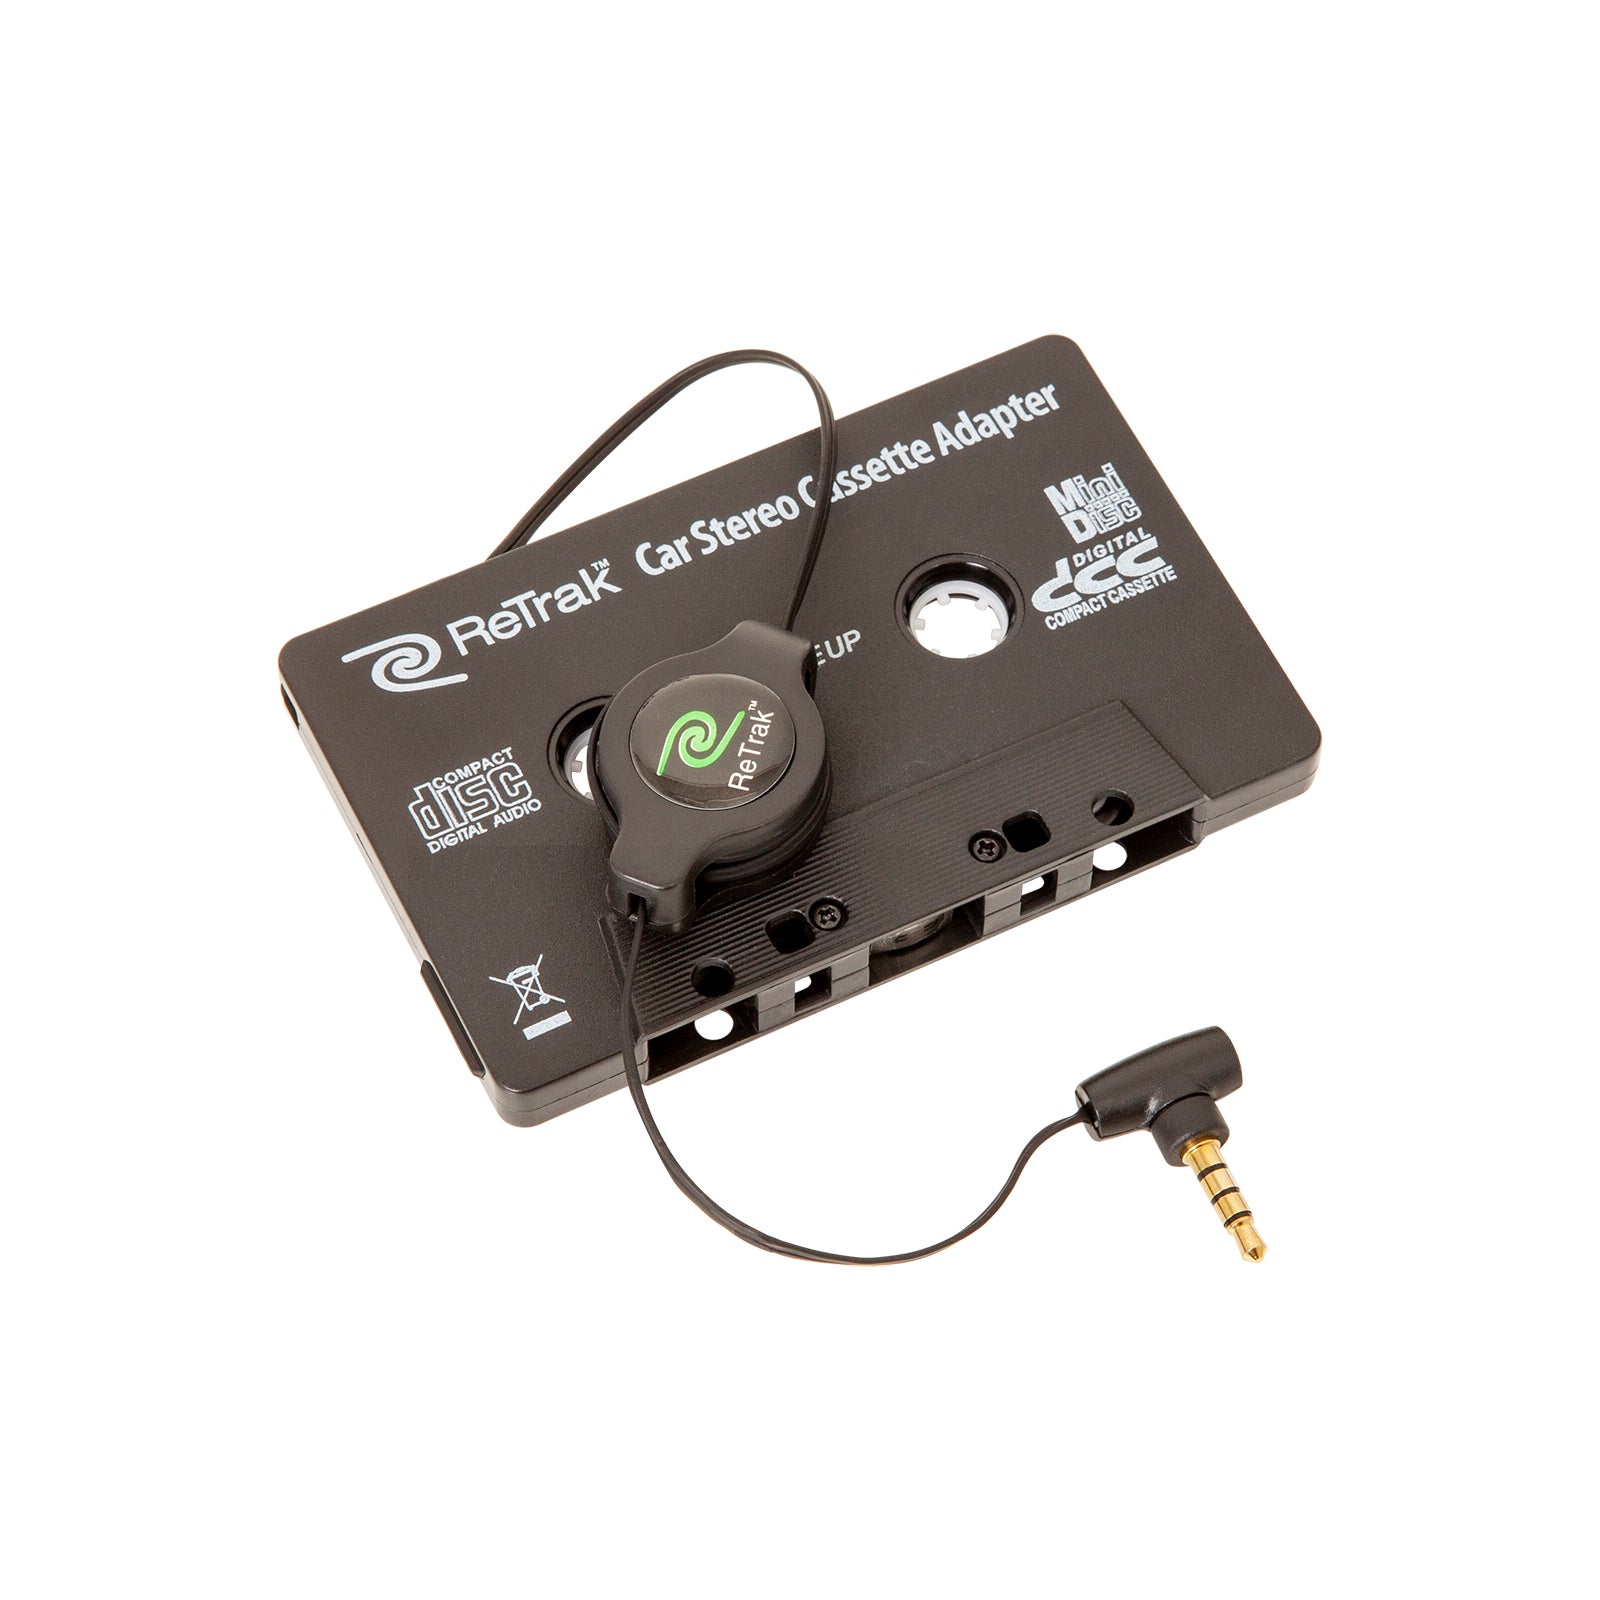 Cassette Adapter and Mic  Retractable Cassette Player Adapter